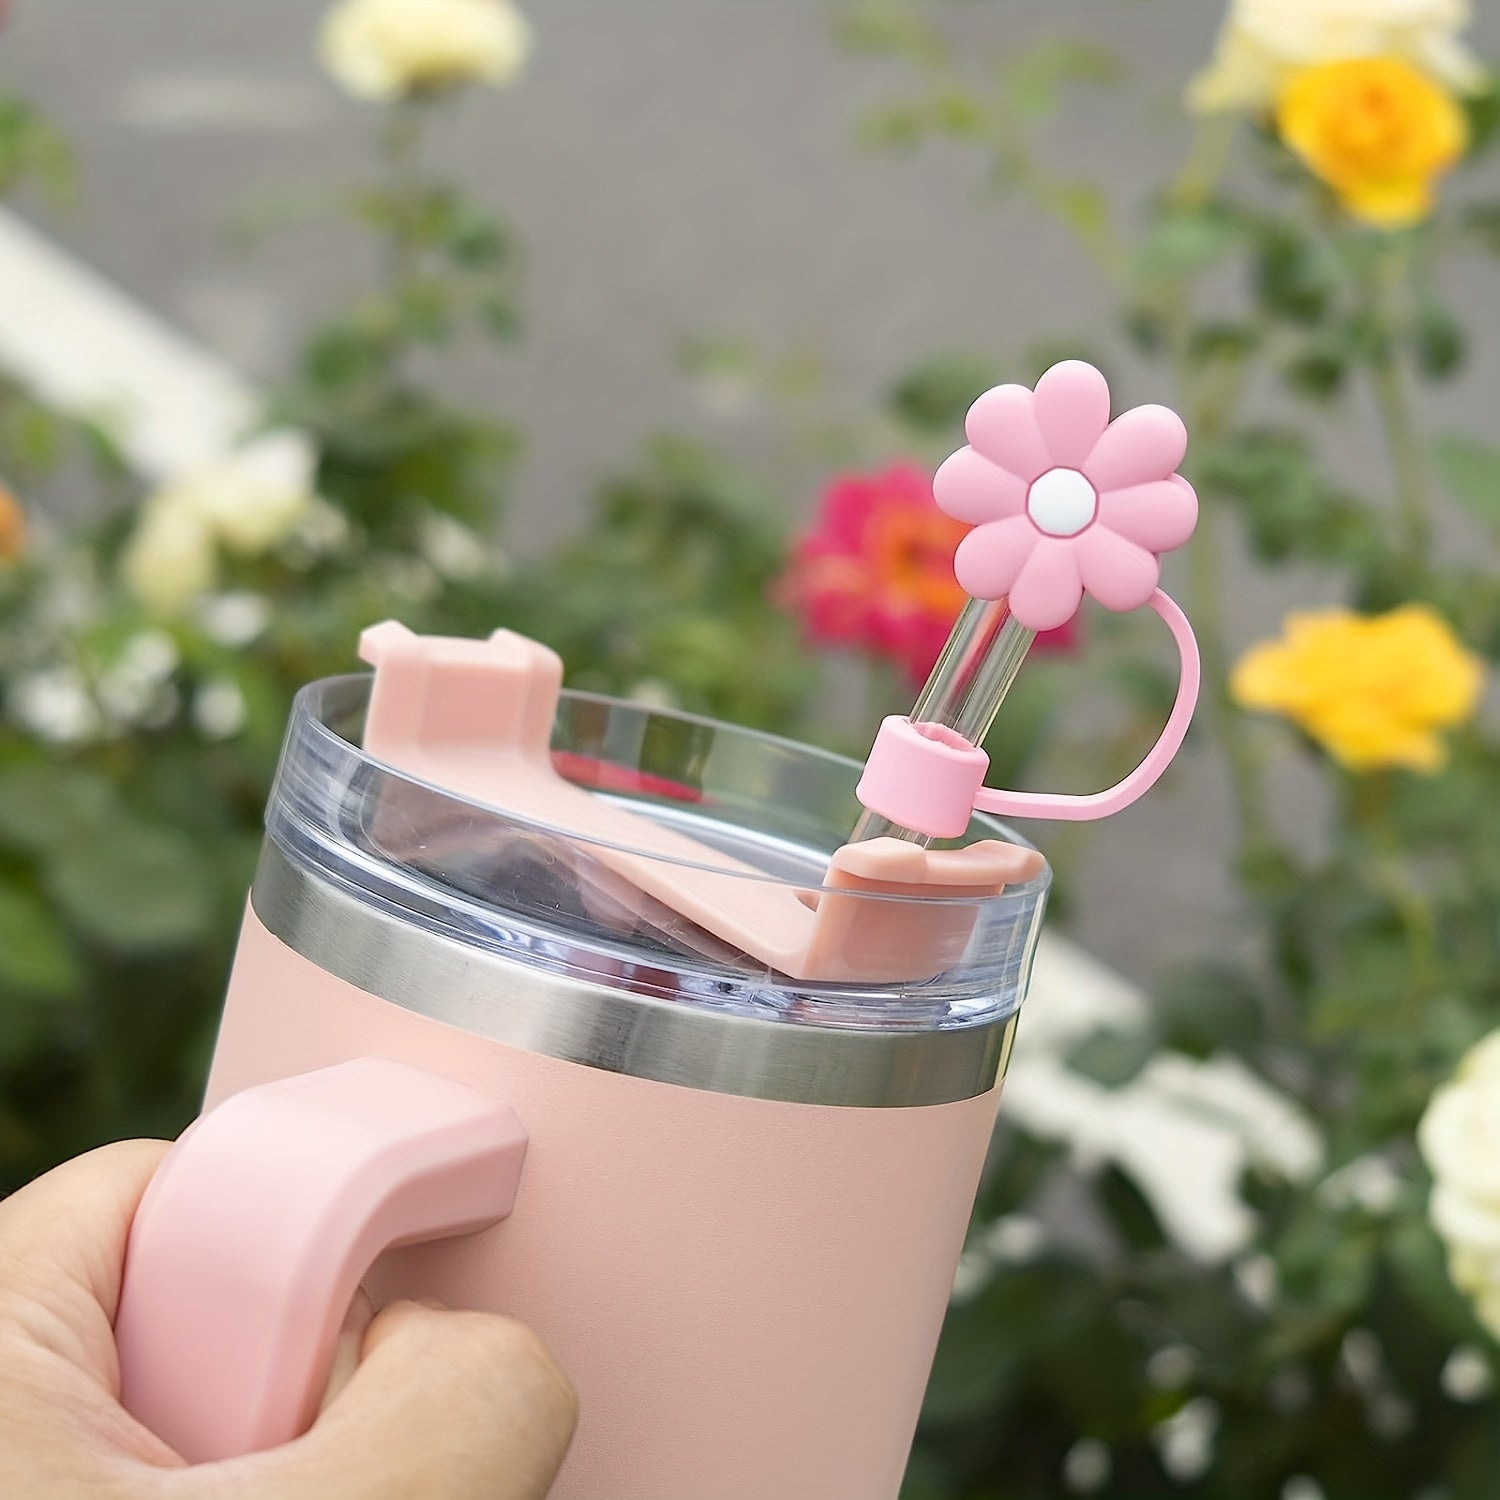 4pcs 0.4in Diameter Cute Silicone Straw Tips Cover Straw Caps For Stanley Cup, Kawaii Flower Dust-Proof Drinking Straw Reusable Straw Tips Lids